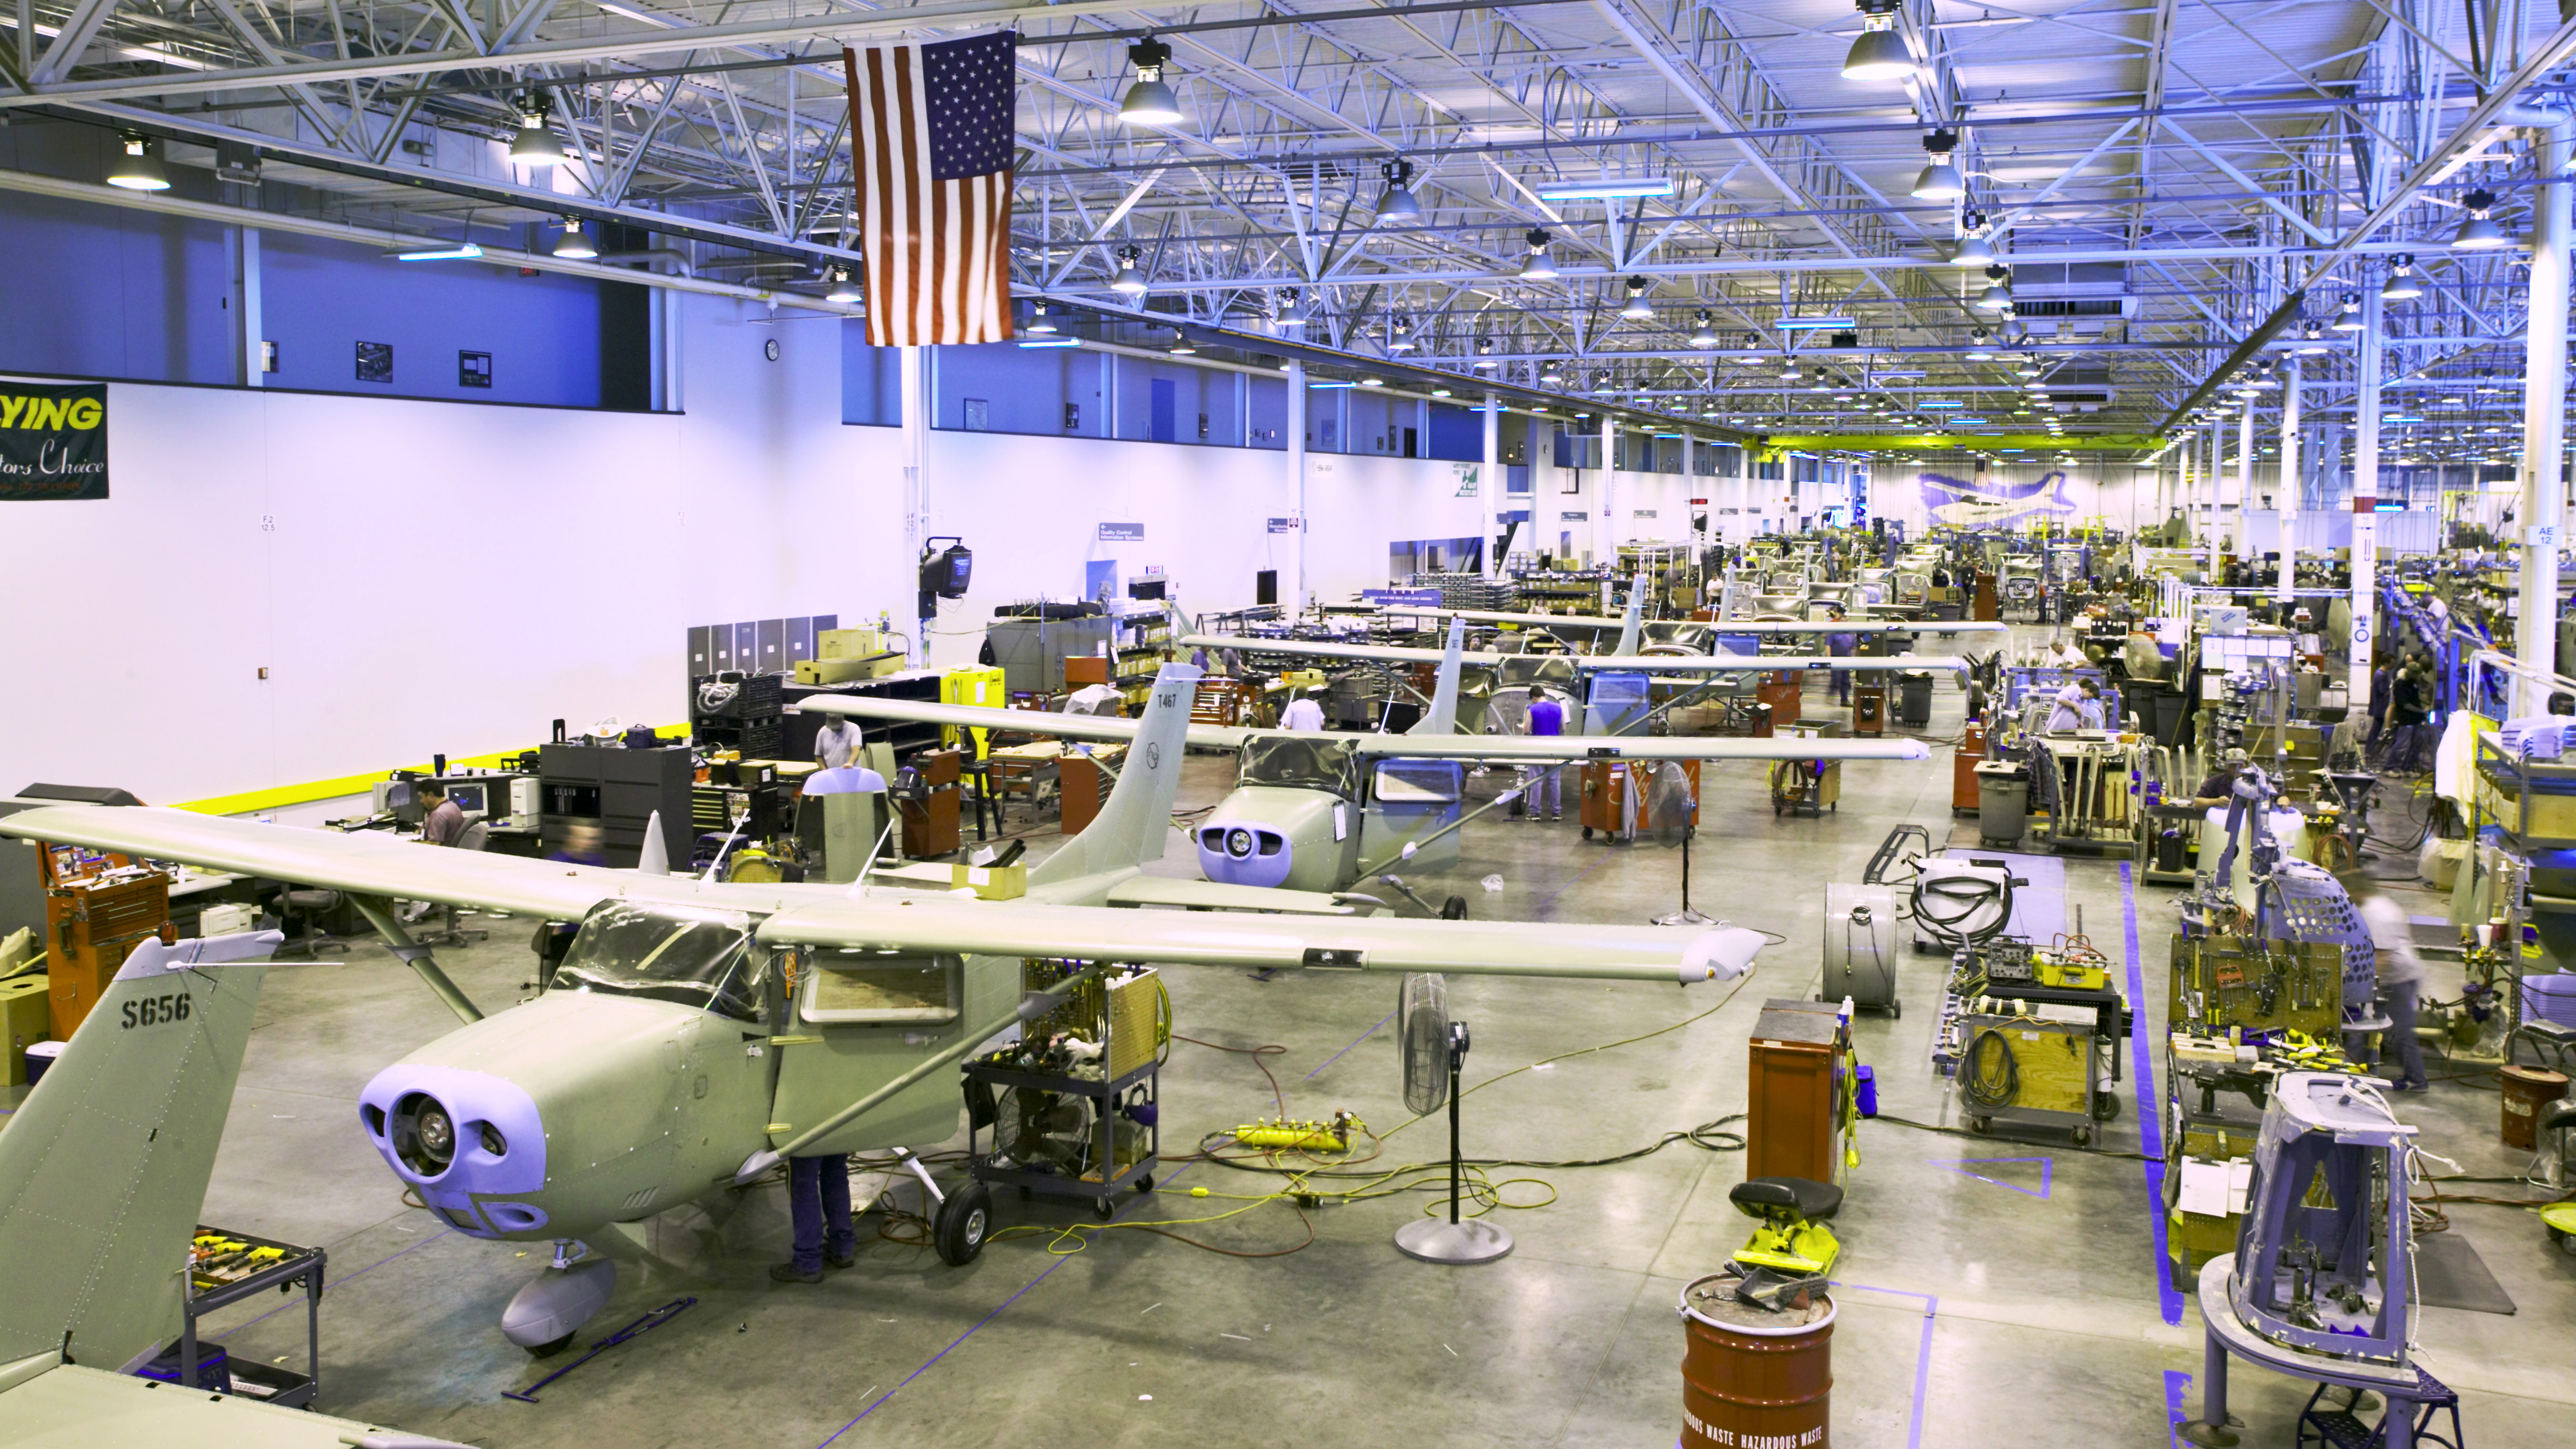 Cessna singe-engine production line in Independence, Kansas. Photo by Mike Fizer.